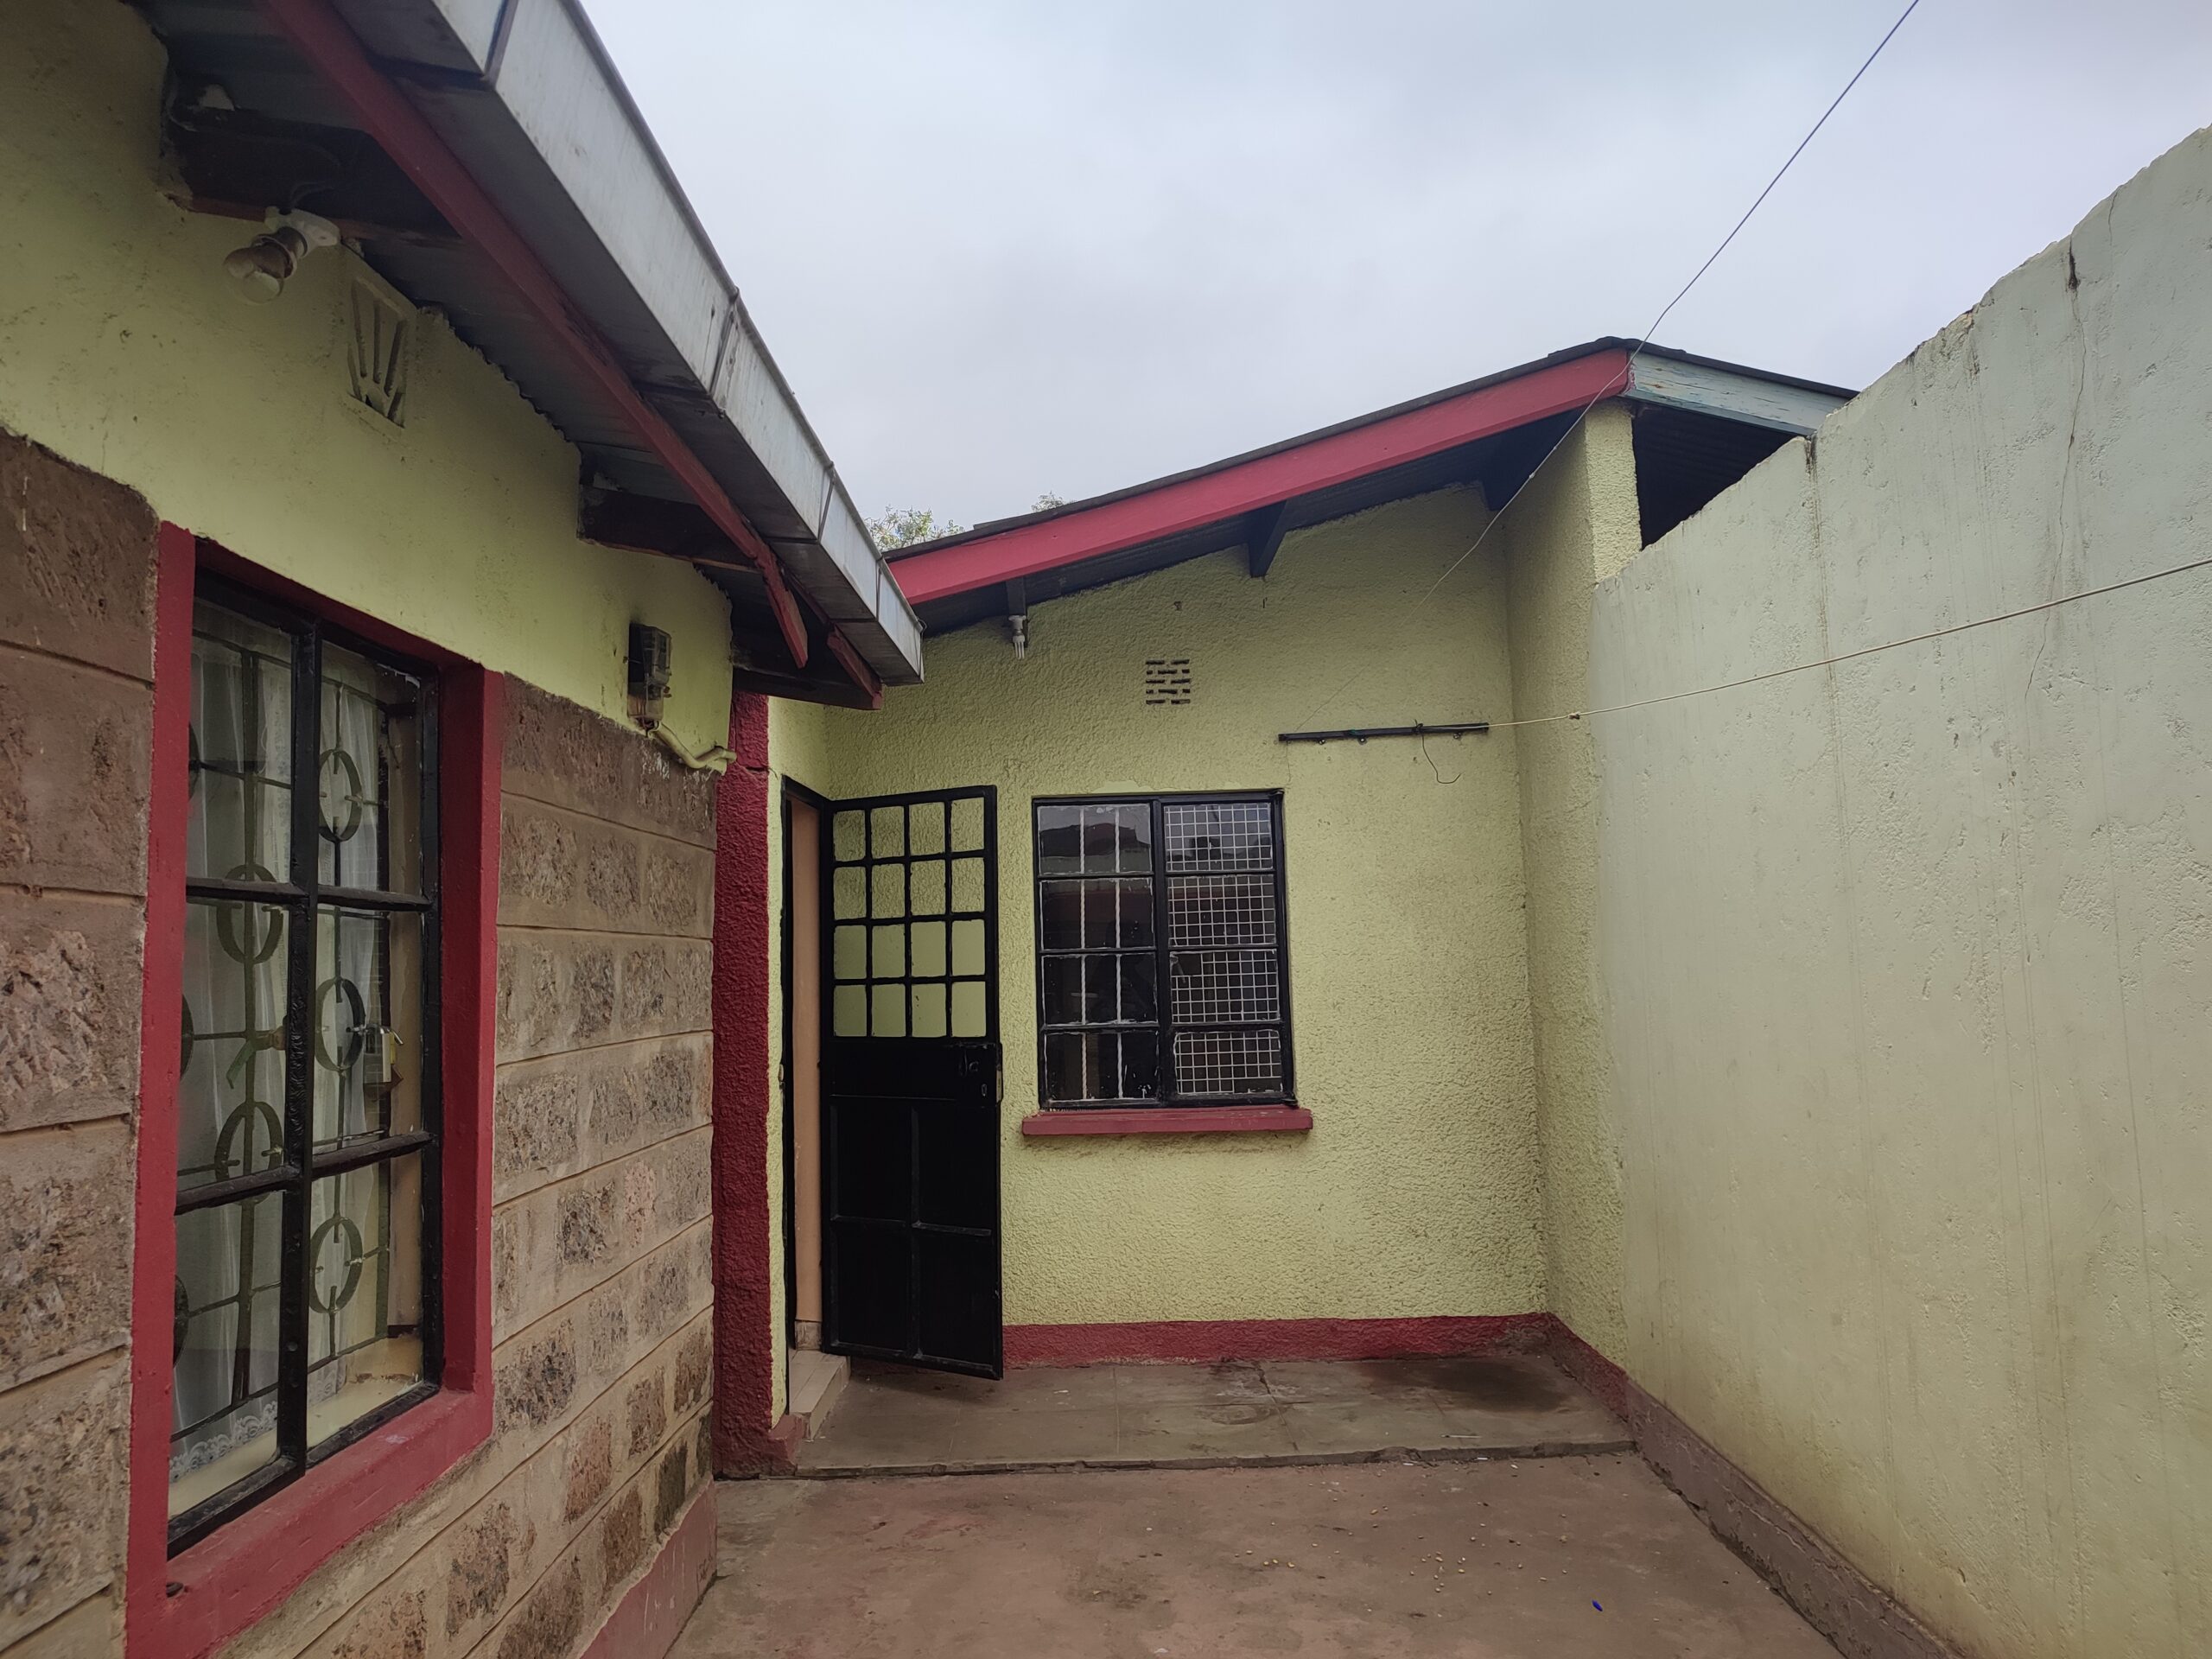 3 Bedroom + 1 Br Extension Bungalow FOR SALE, Kariobangi South